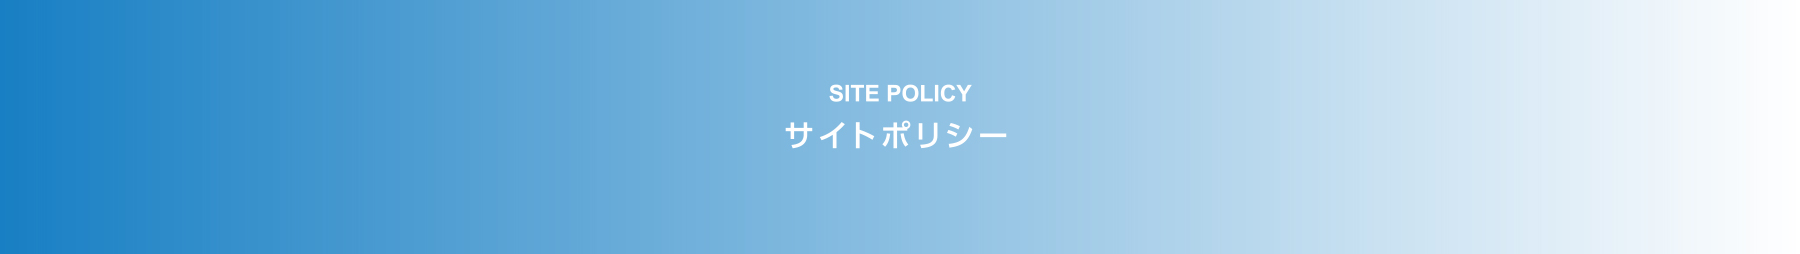 SITE POLICY サイトポリシー